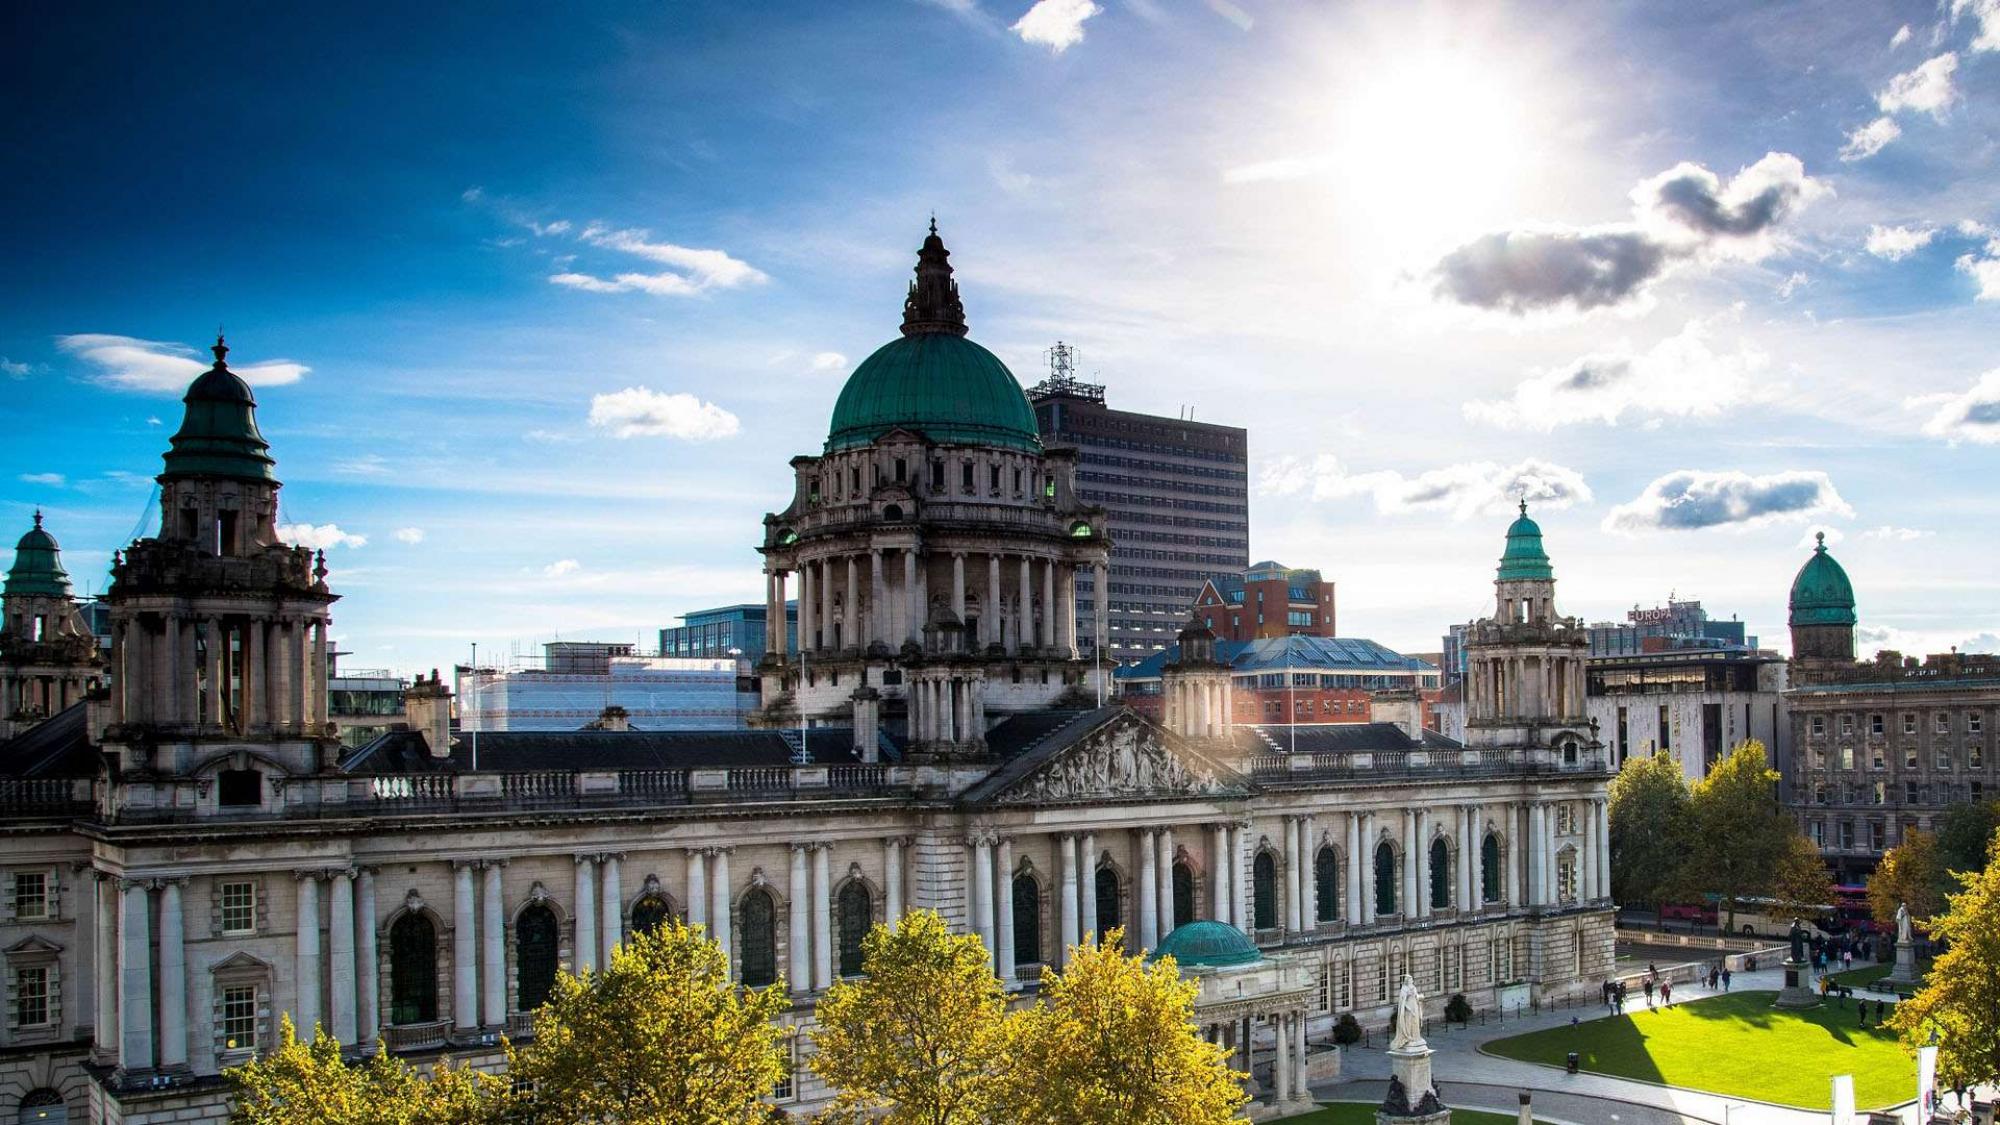 The impressive Belfast city centre situated in astounding Northern Ireland.